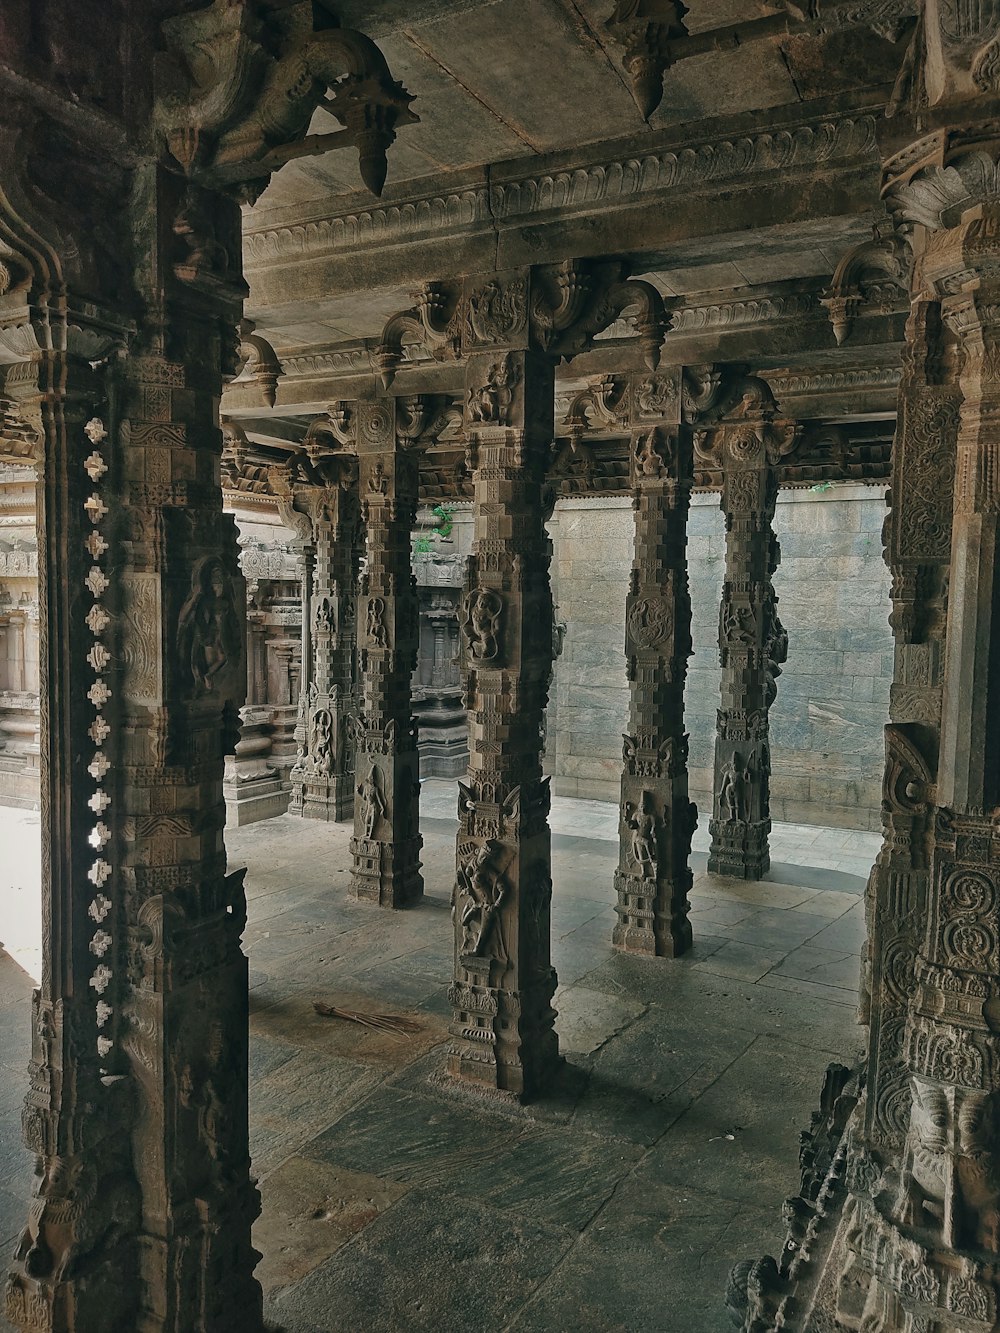 a room with pillars and statues